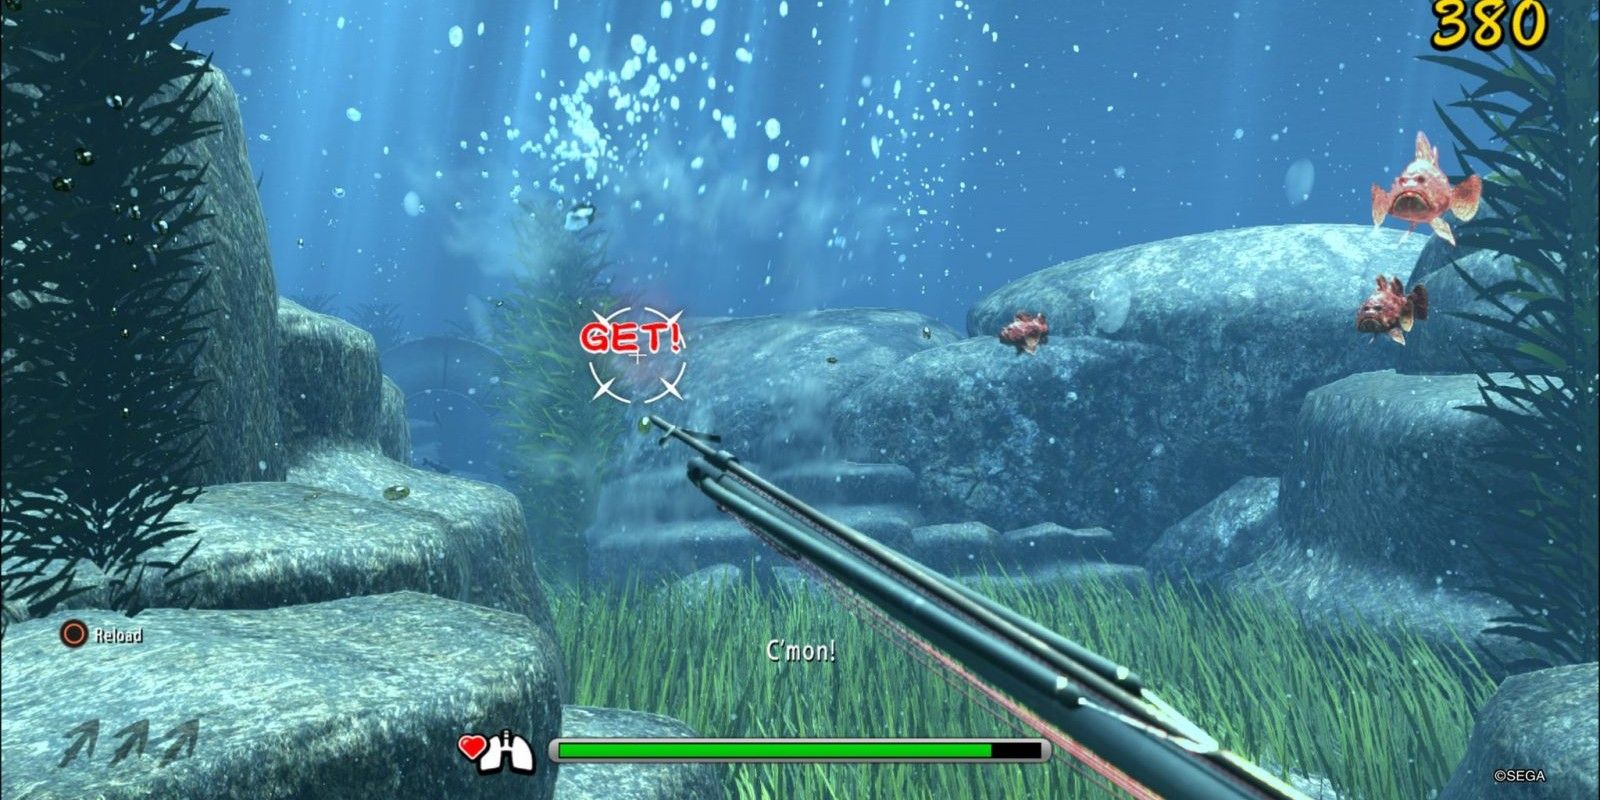 Best Fishing Video Game Mechanics in Games Not Focused on Fishing